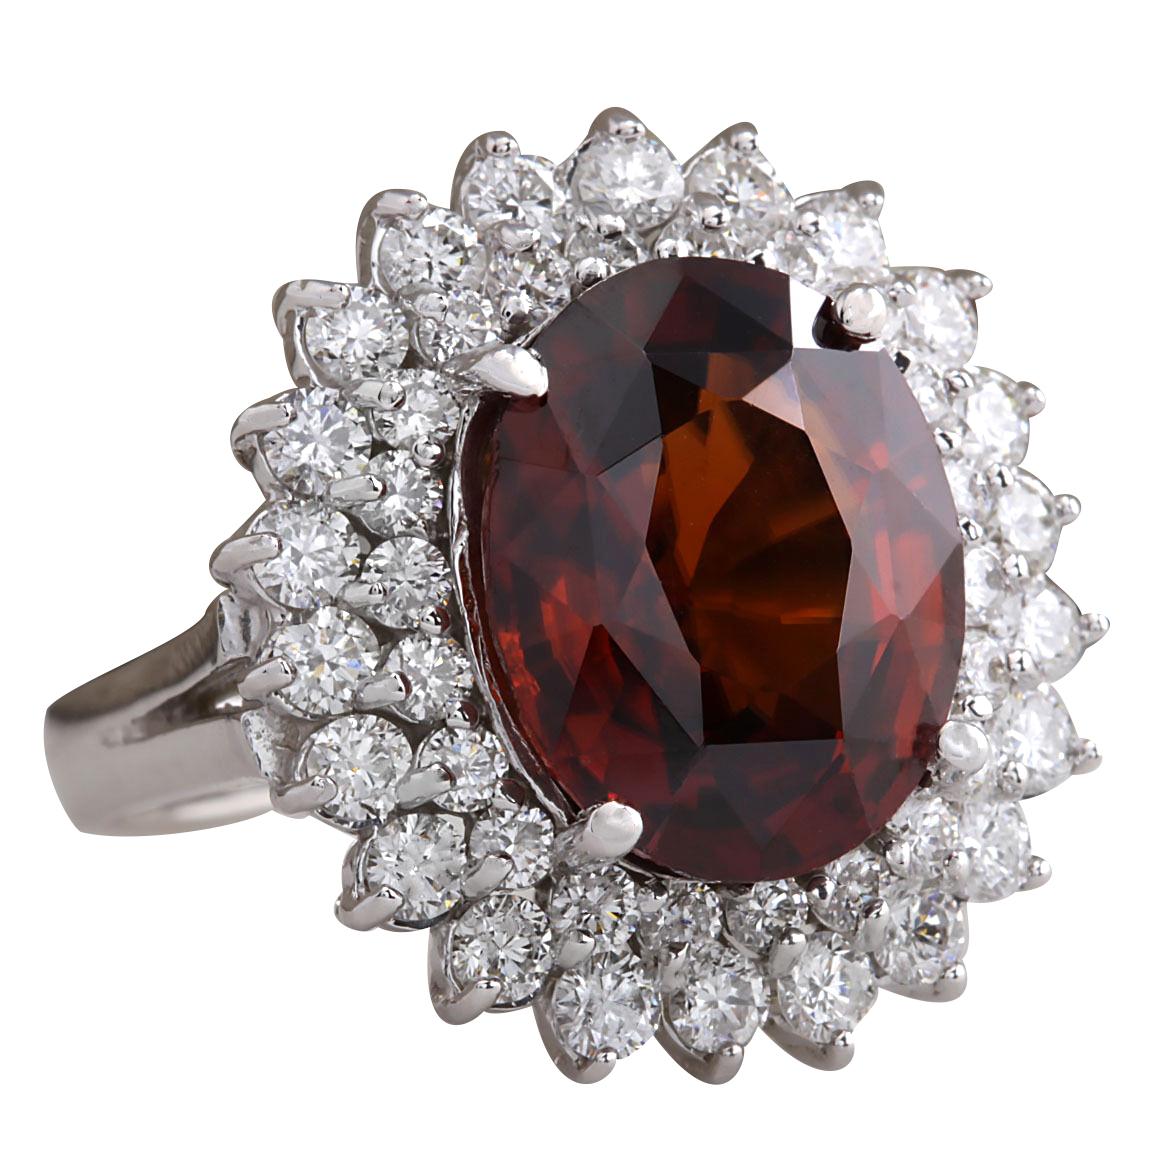 Stamped: 14K White Gold
Total Ring Weight: 6.8 Grams
Total Natural Hessonite Garnet Weight is 9.41 Carat (Measures: 14.00x10.00 mm)
Color: Red
Total Natural Diamond Weight is 1.60 Carat
Color: F-G, Clarity: VS2-SI1
Face Measures: 20.97x19.30 mm
Sku: